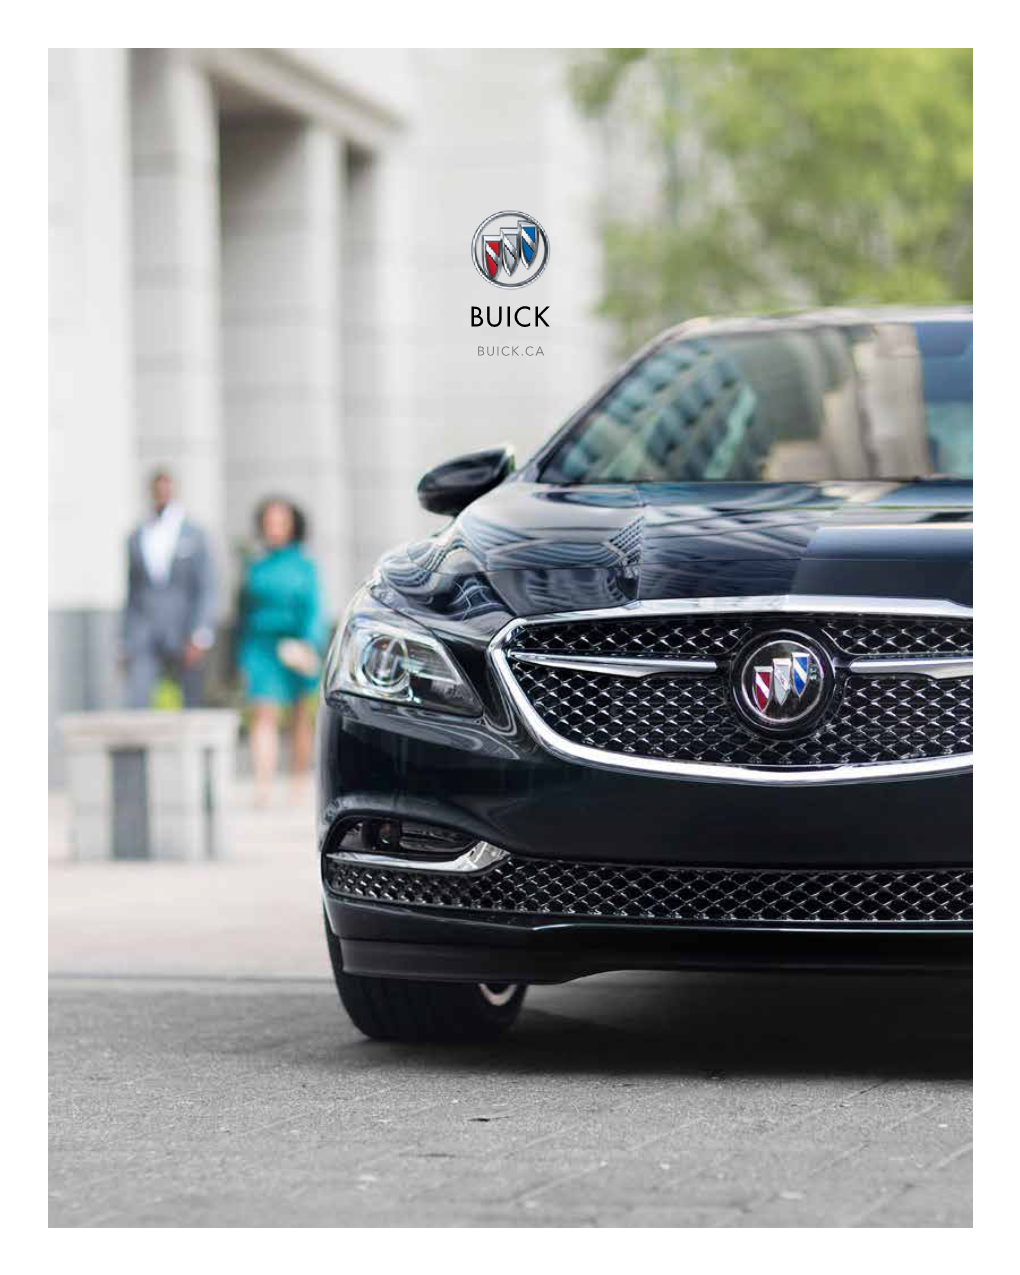 2019 BUICK LACROSSE Lacrosse Avenir Shown in Pewter Metallic with Available Features